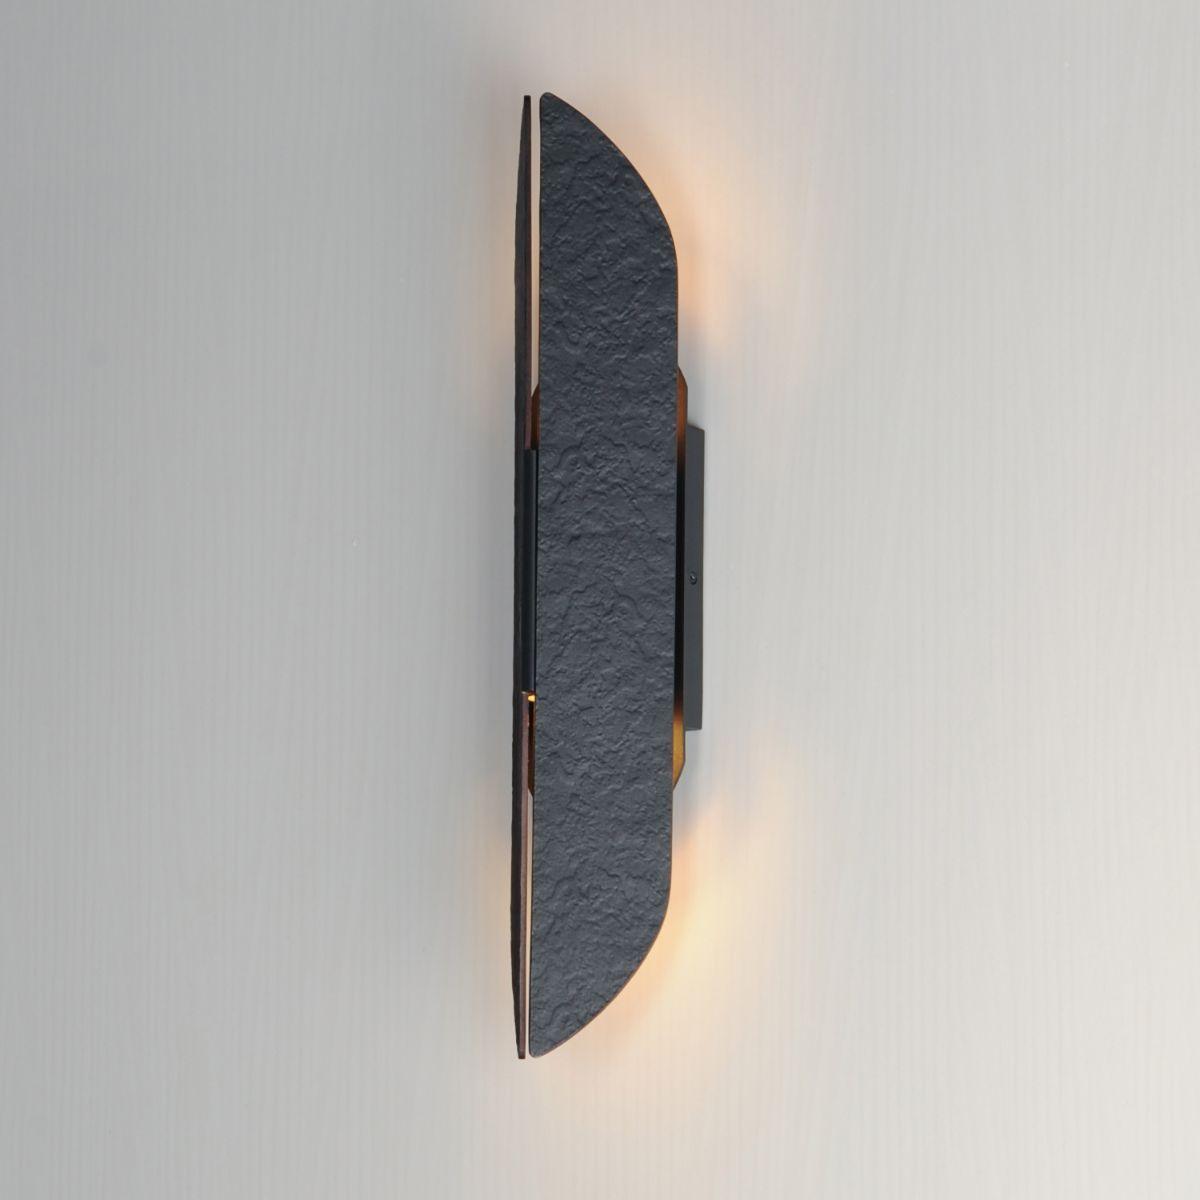 Tectonic 22 in. LED Outdoor Wall Sconce 3000K Black Finish